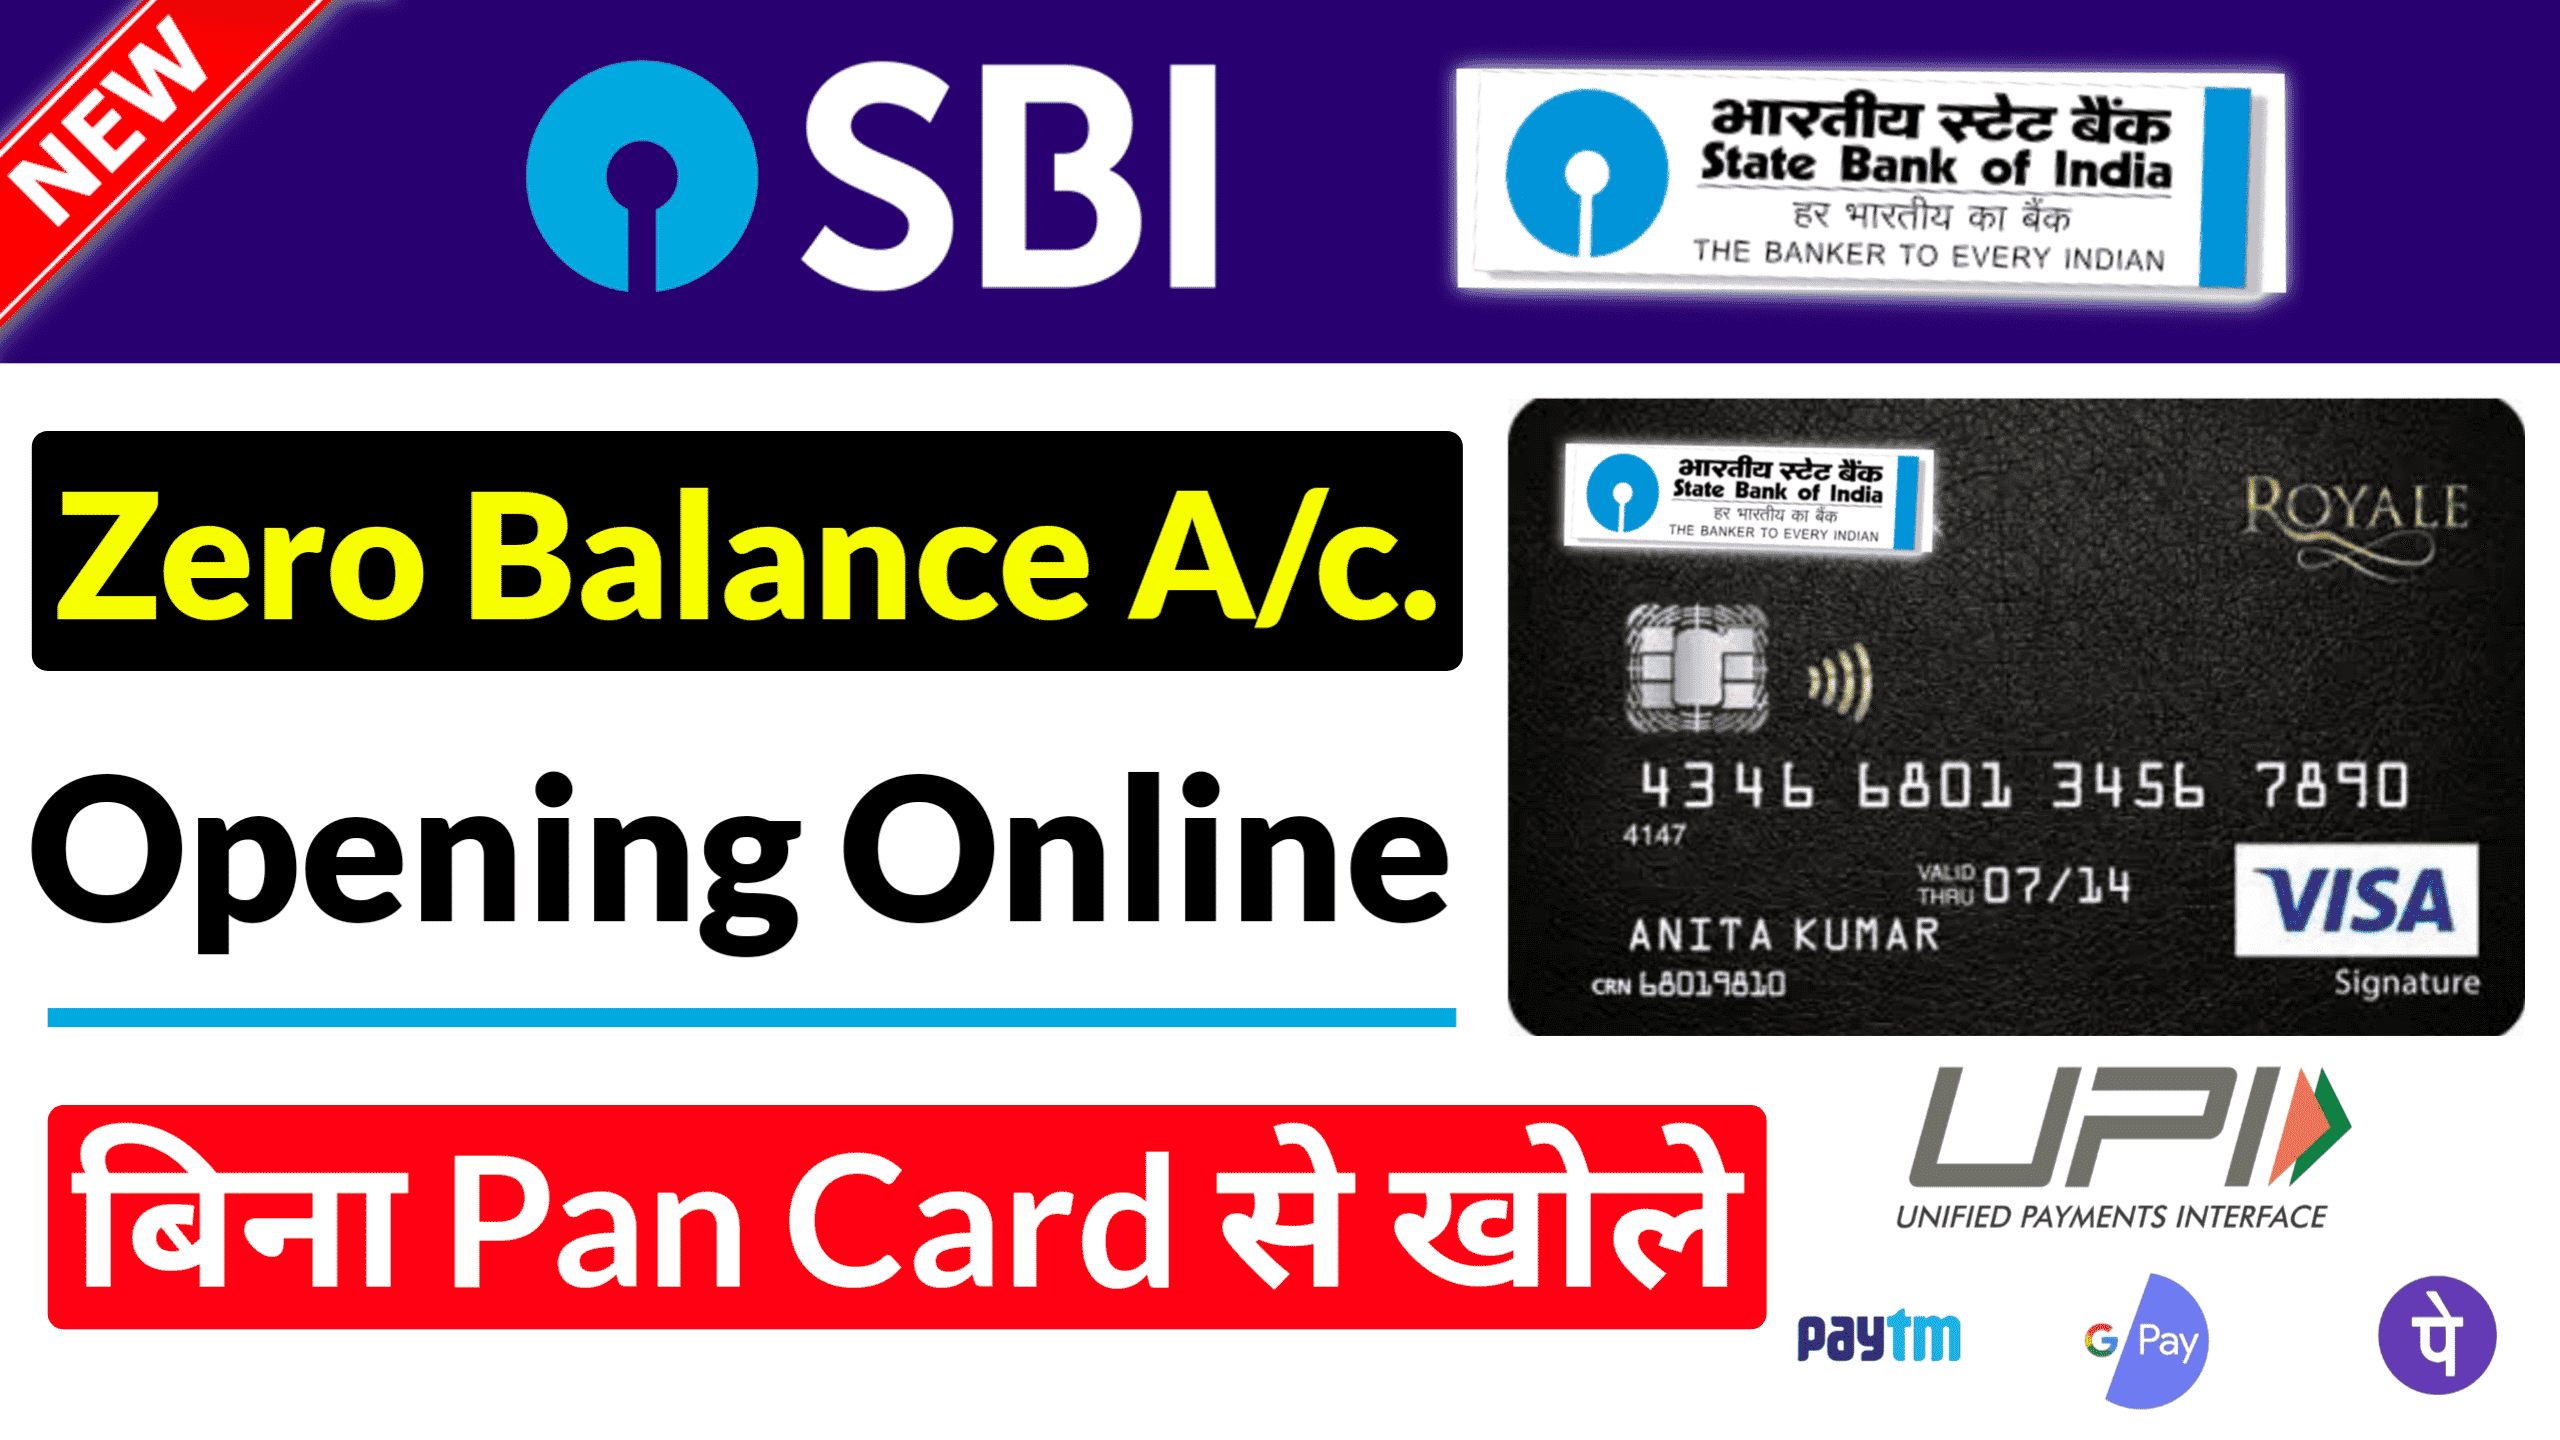 SBI Account Opening Online Without Pan Card